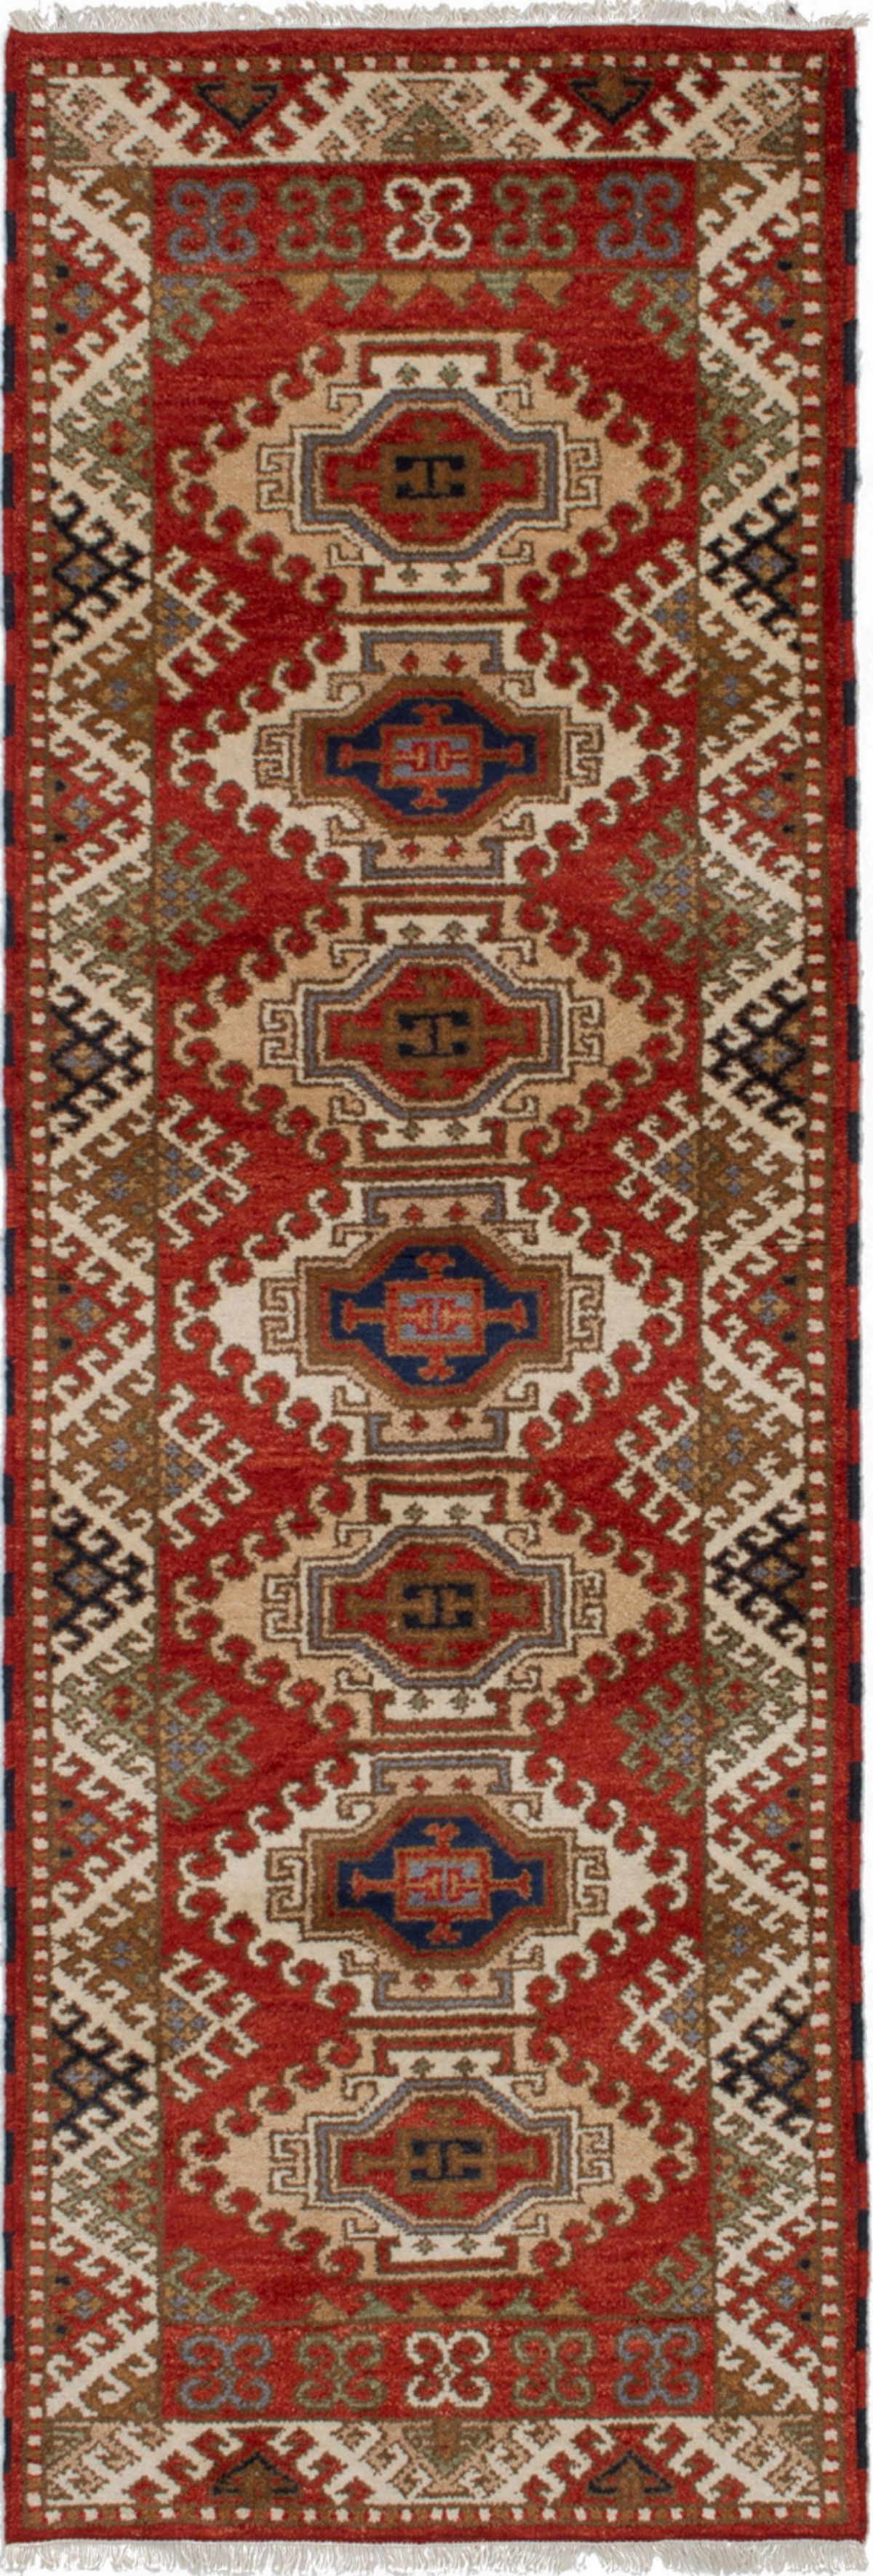 Hand-knotted Royal Kazak Red Wool Rug 2'8" x 8'1"  Size: 2'8" x 8'1"  